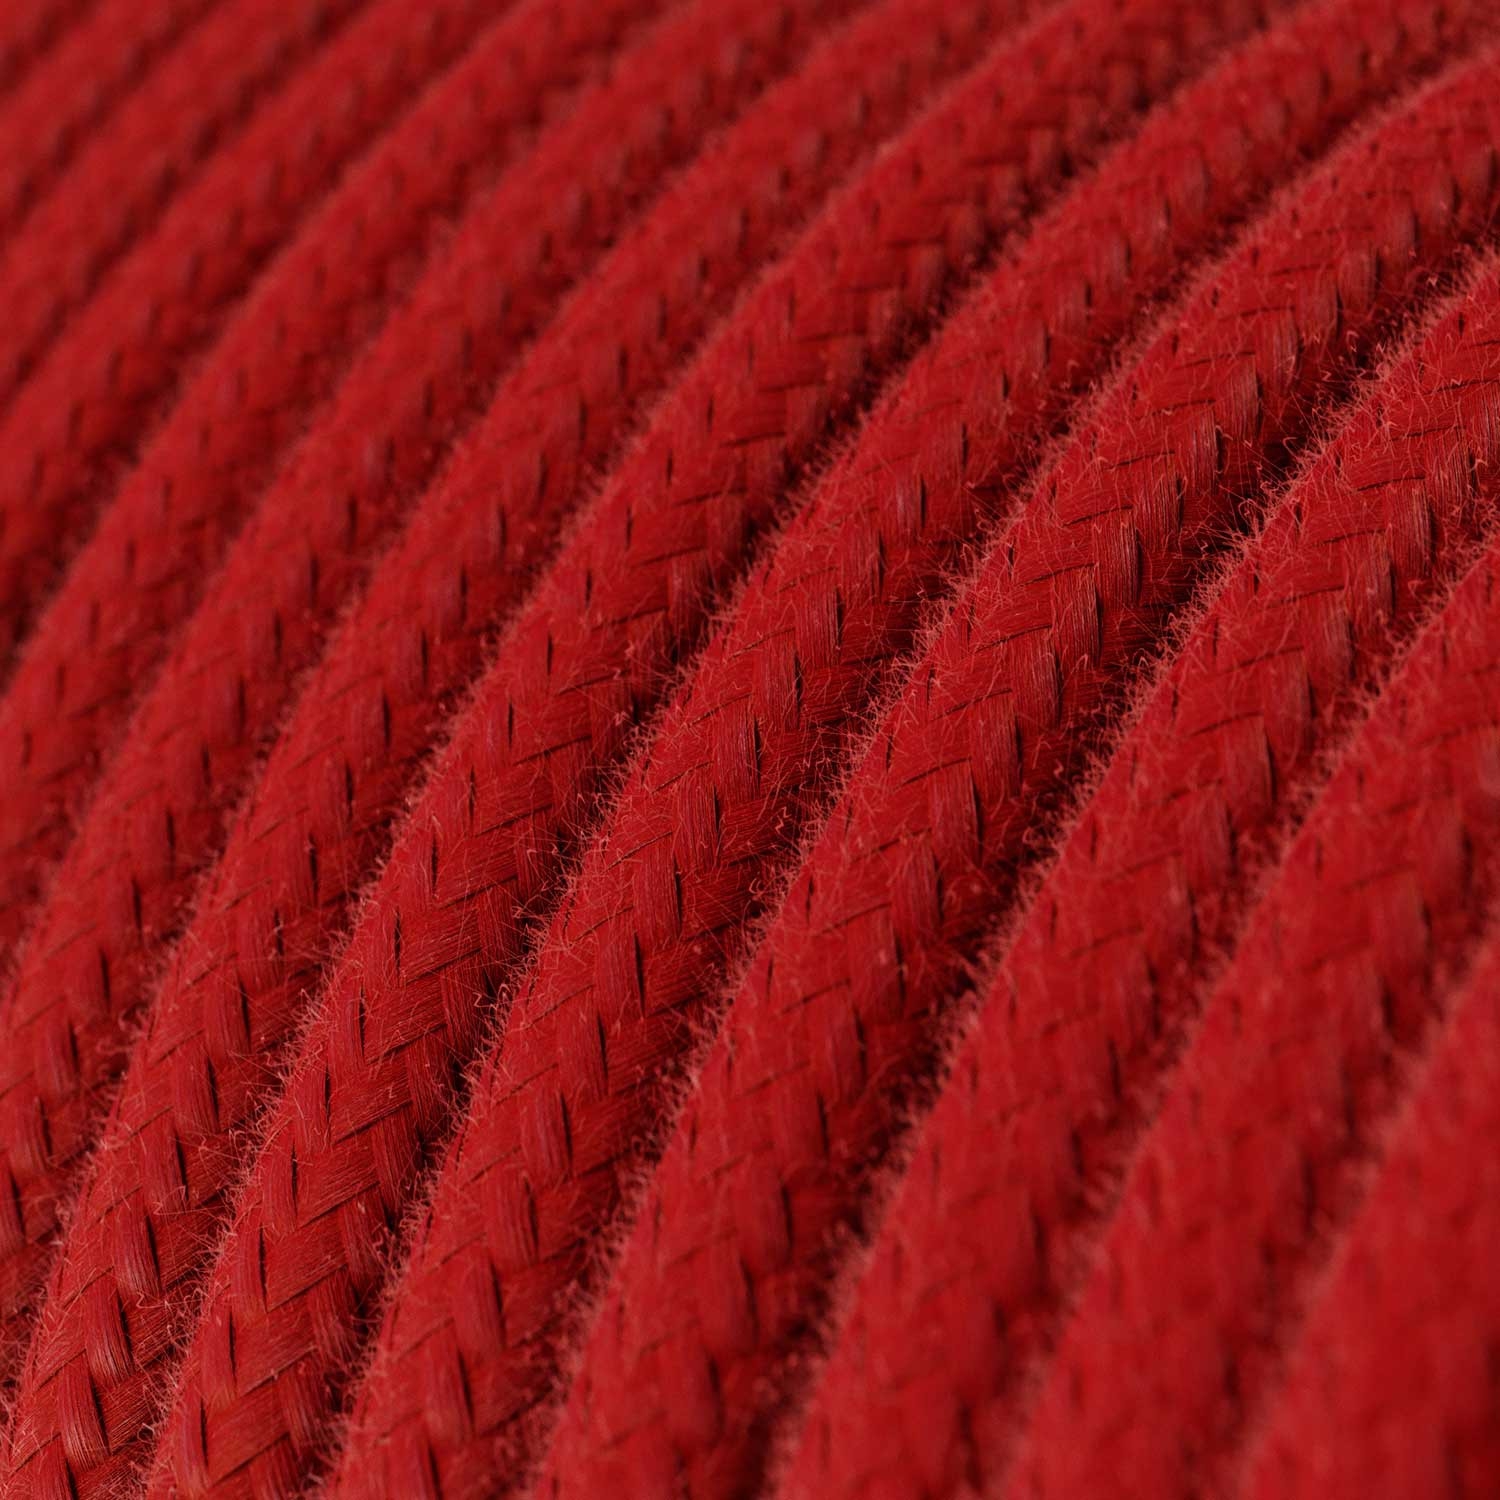 RC35 Fire Red Round Cotton Electrical Fabric Cloth Cord Cable